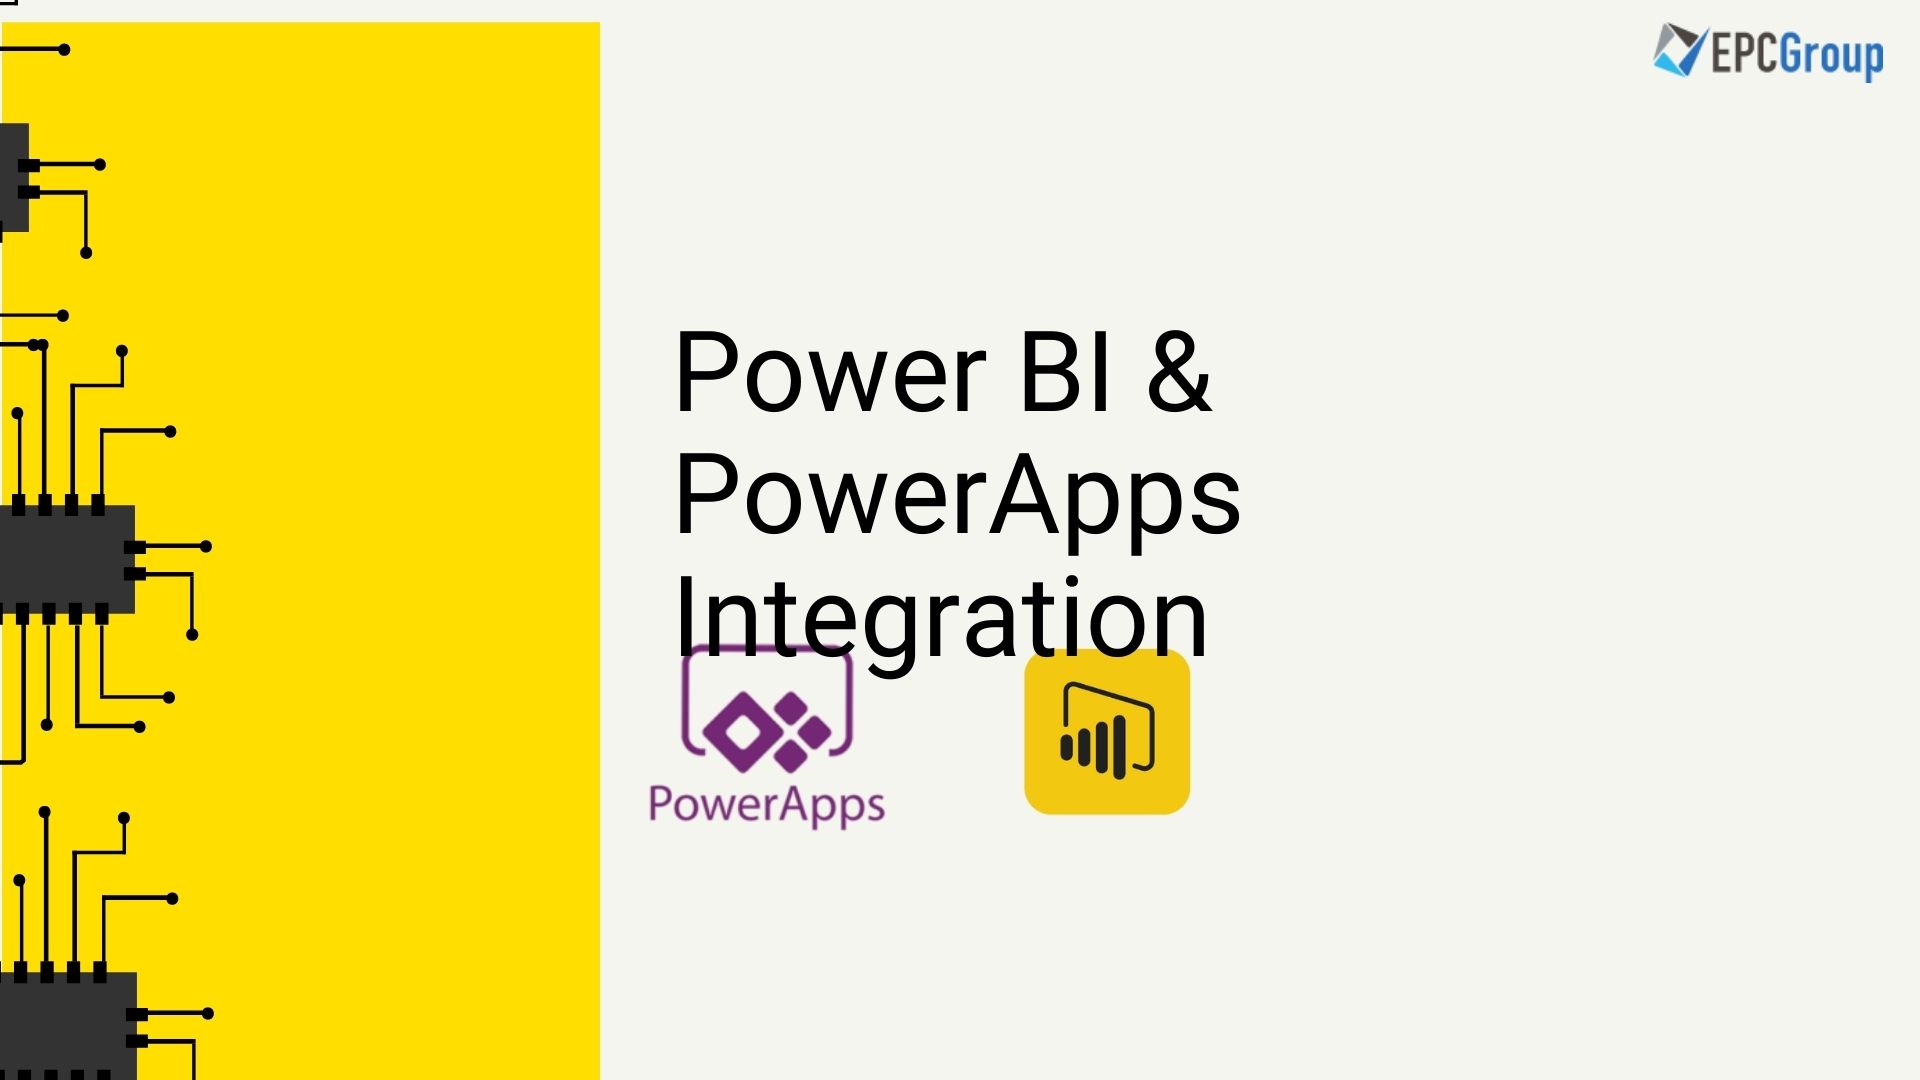 How to Achieve Seamless Power BI Integration with PowerApps